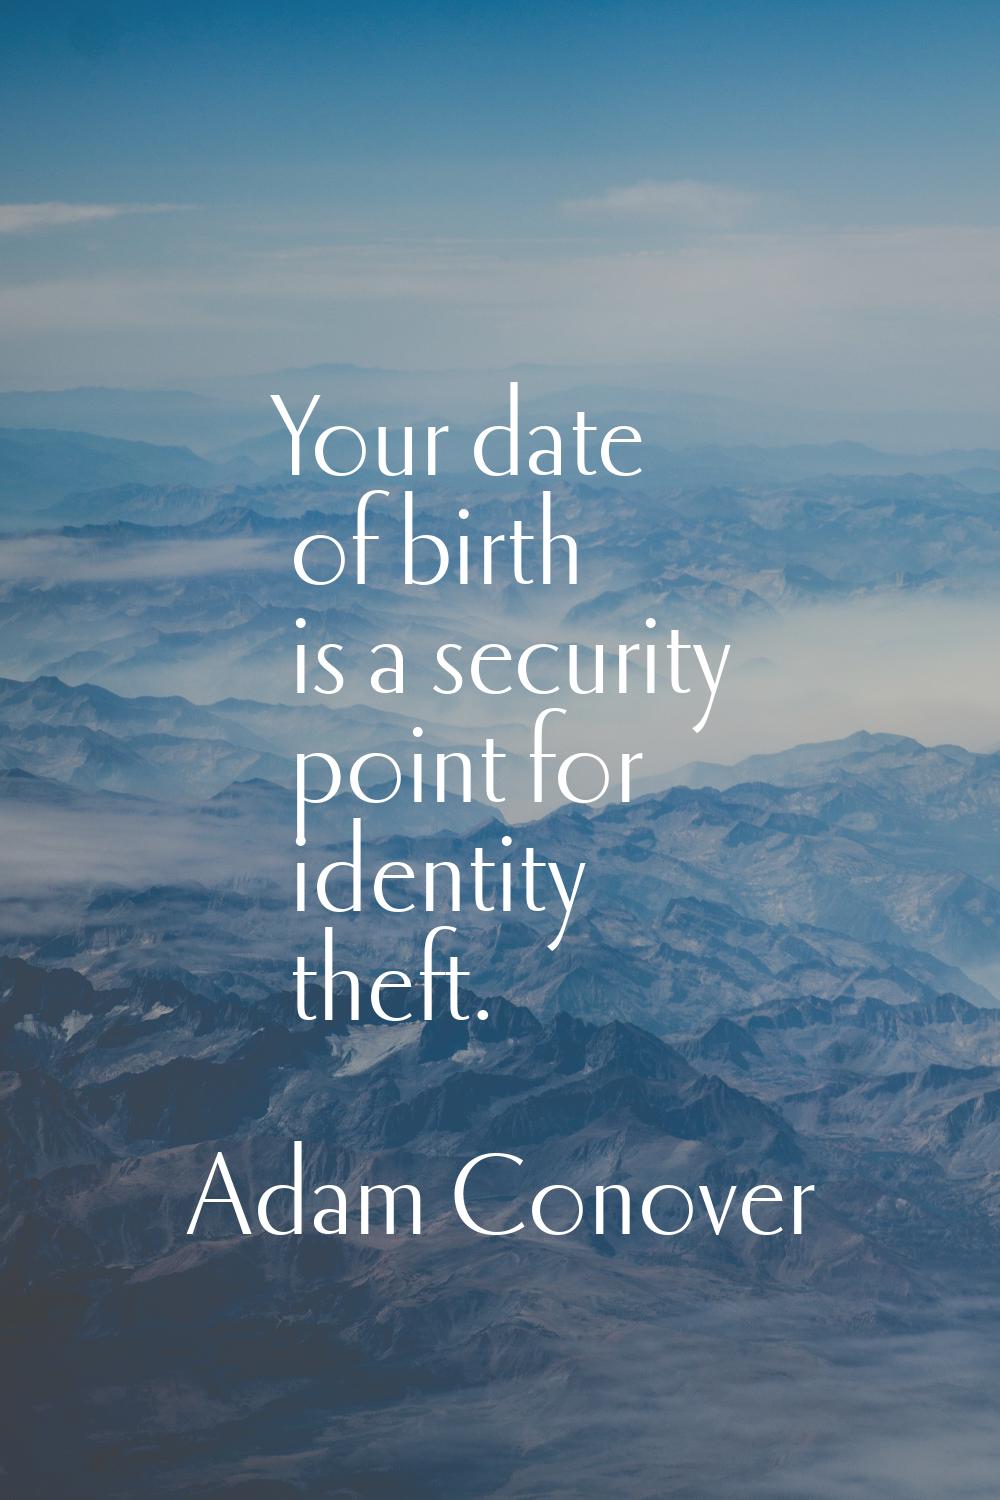 Your date of birth is a security point for identity theft.